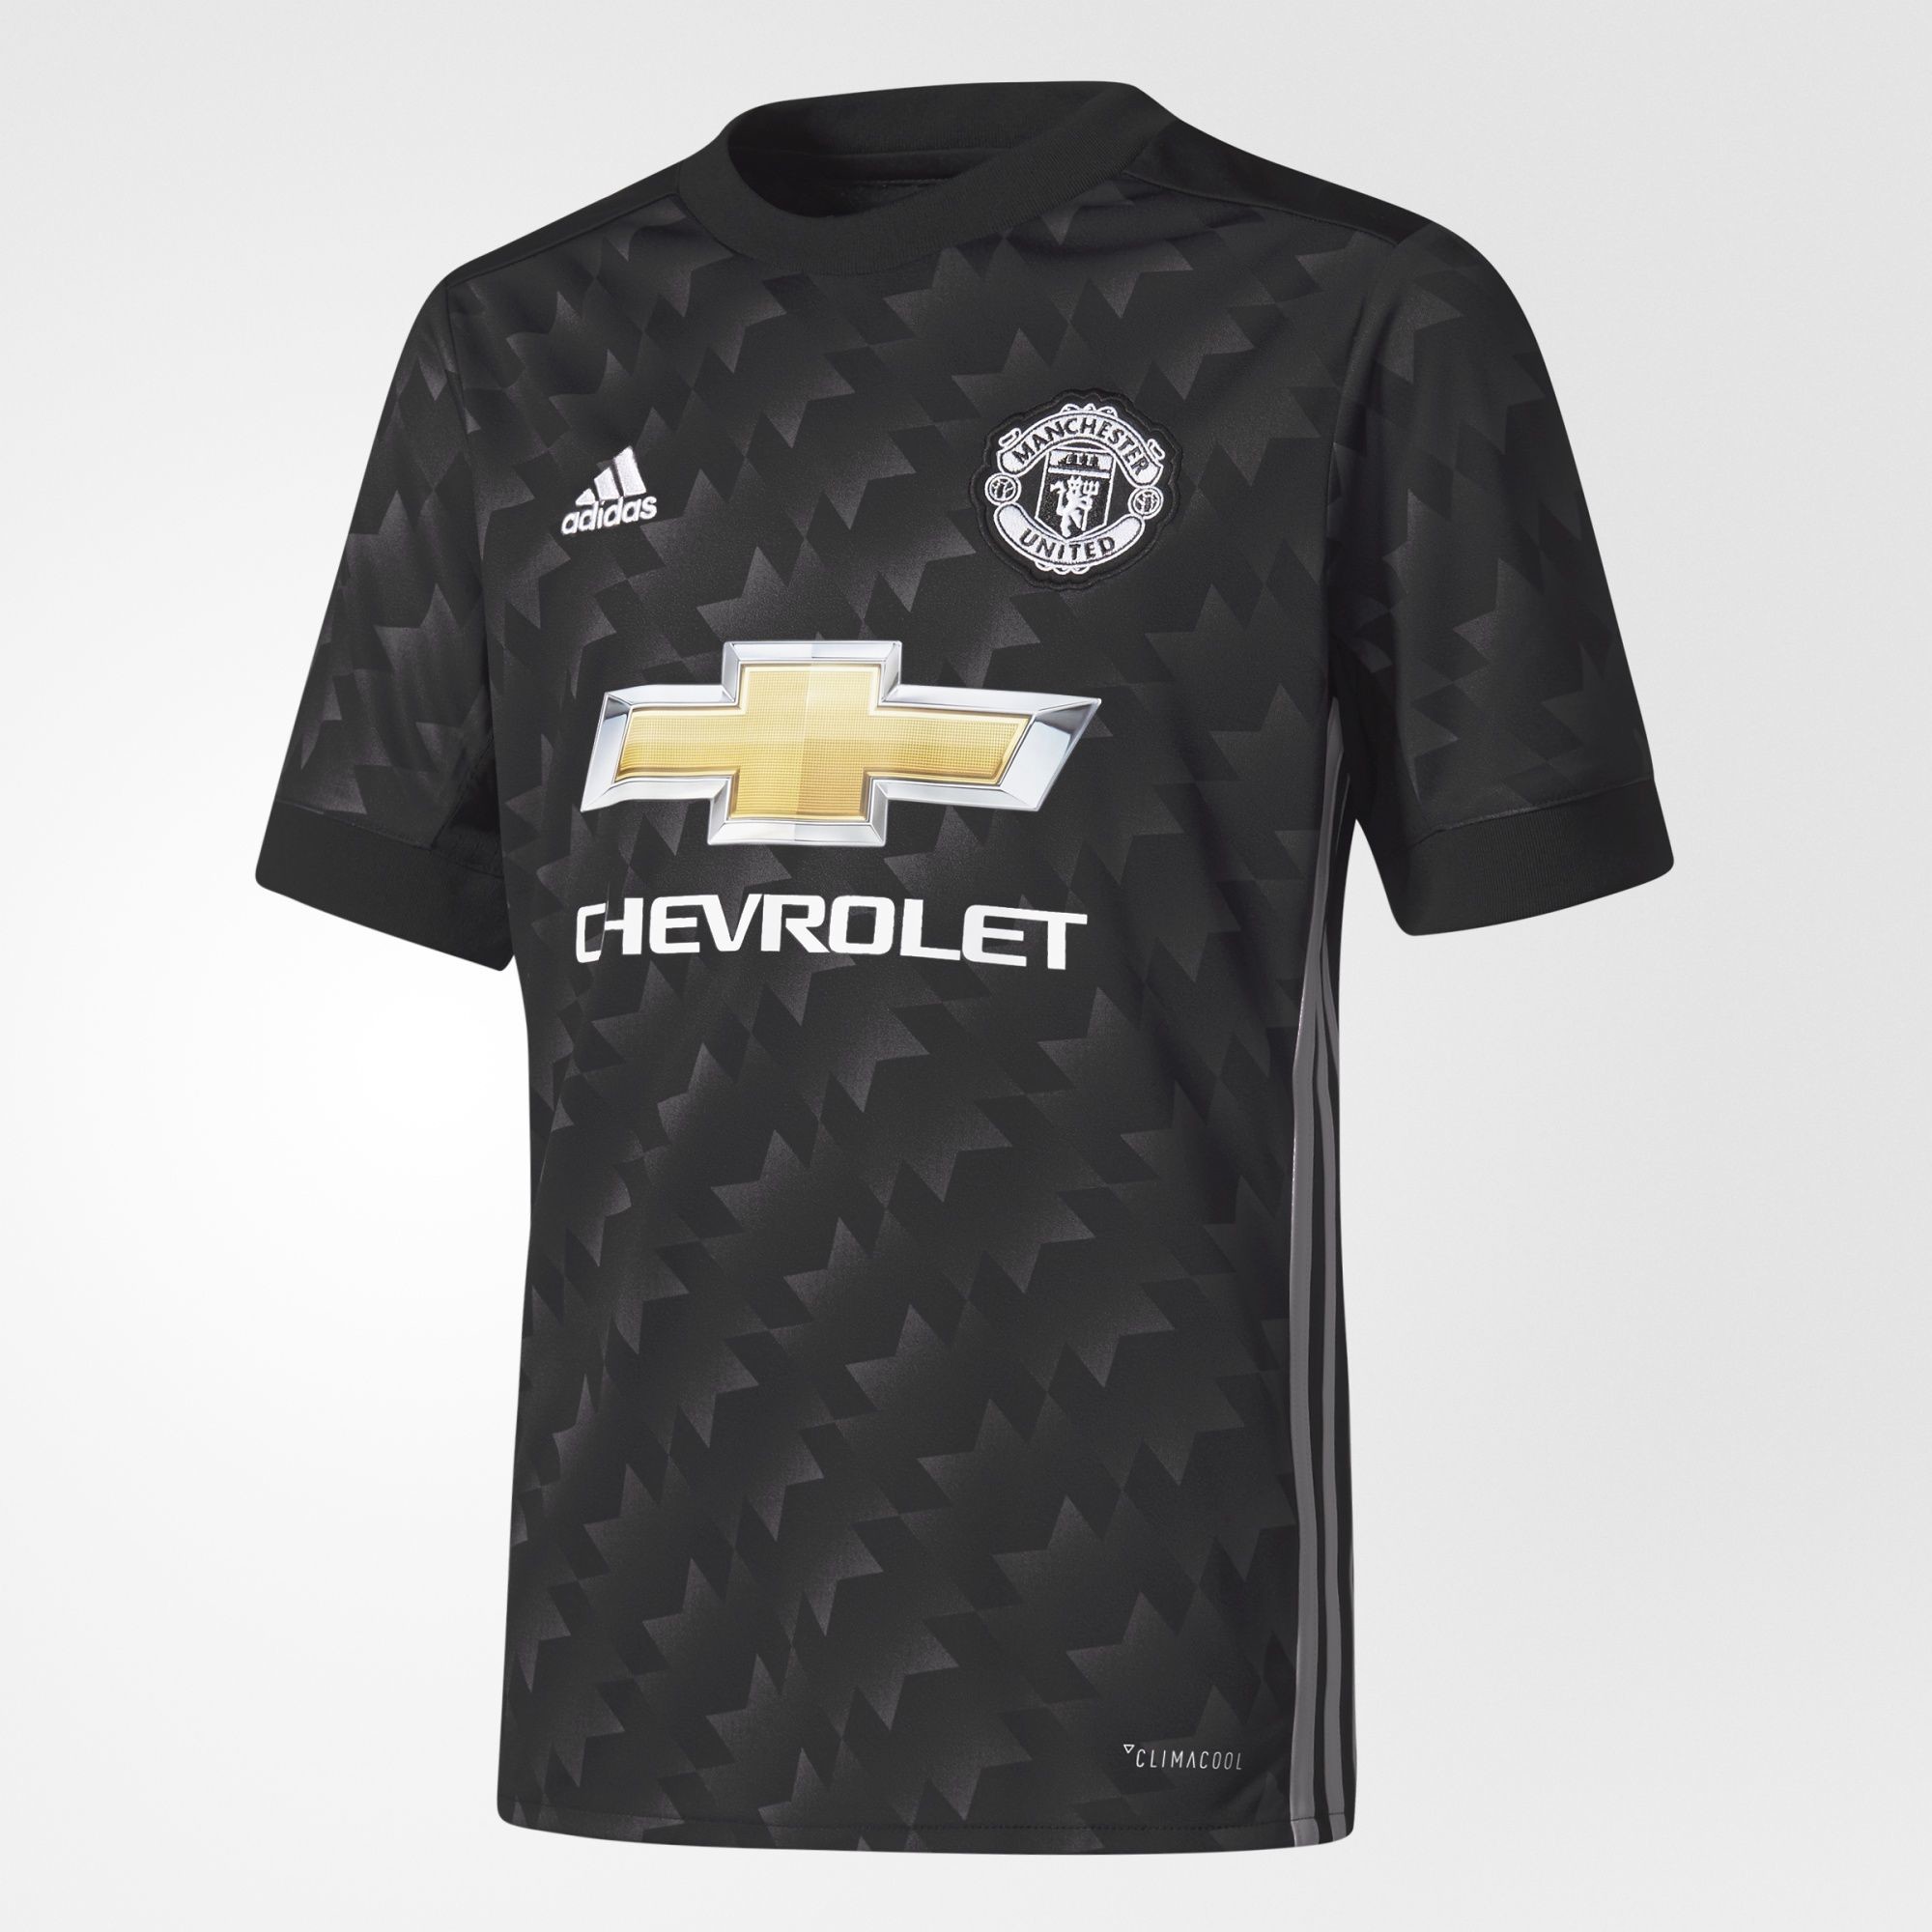 Awesome Manchester United New Jersey Series Wallpapers Include Amazing Pictures From All Pick Any Manchester United